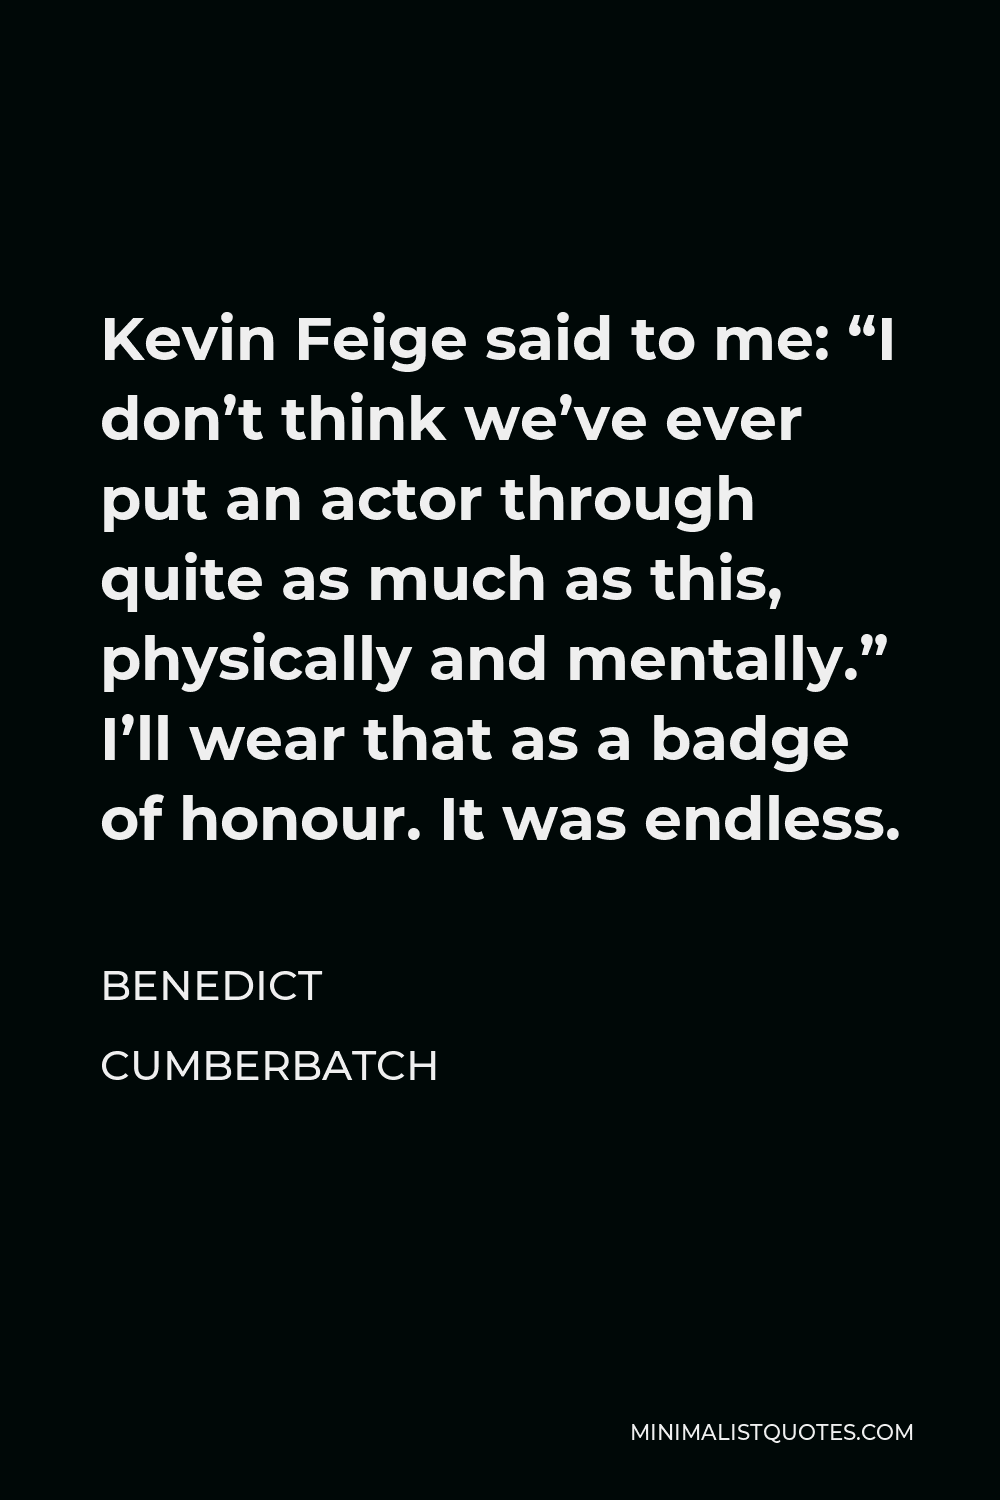 Benedict Cumberbatch Quote - Kevin Feige said to me: “I don’t think we’ve ever put an actor through quite as much as this, physically and mentally.” I’ll wear that as a badge of honour. It was endless.